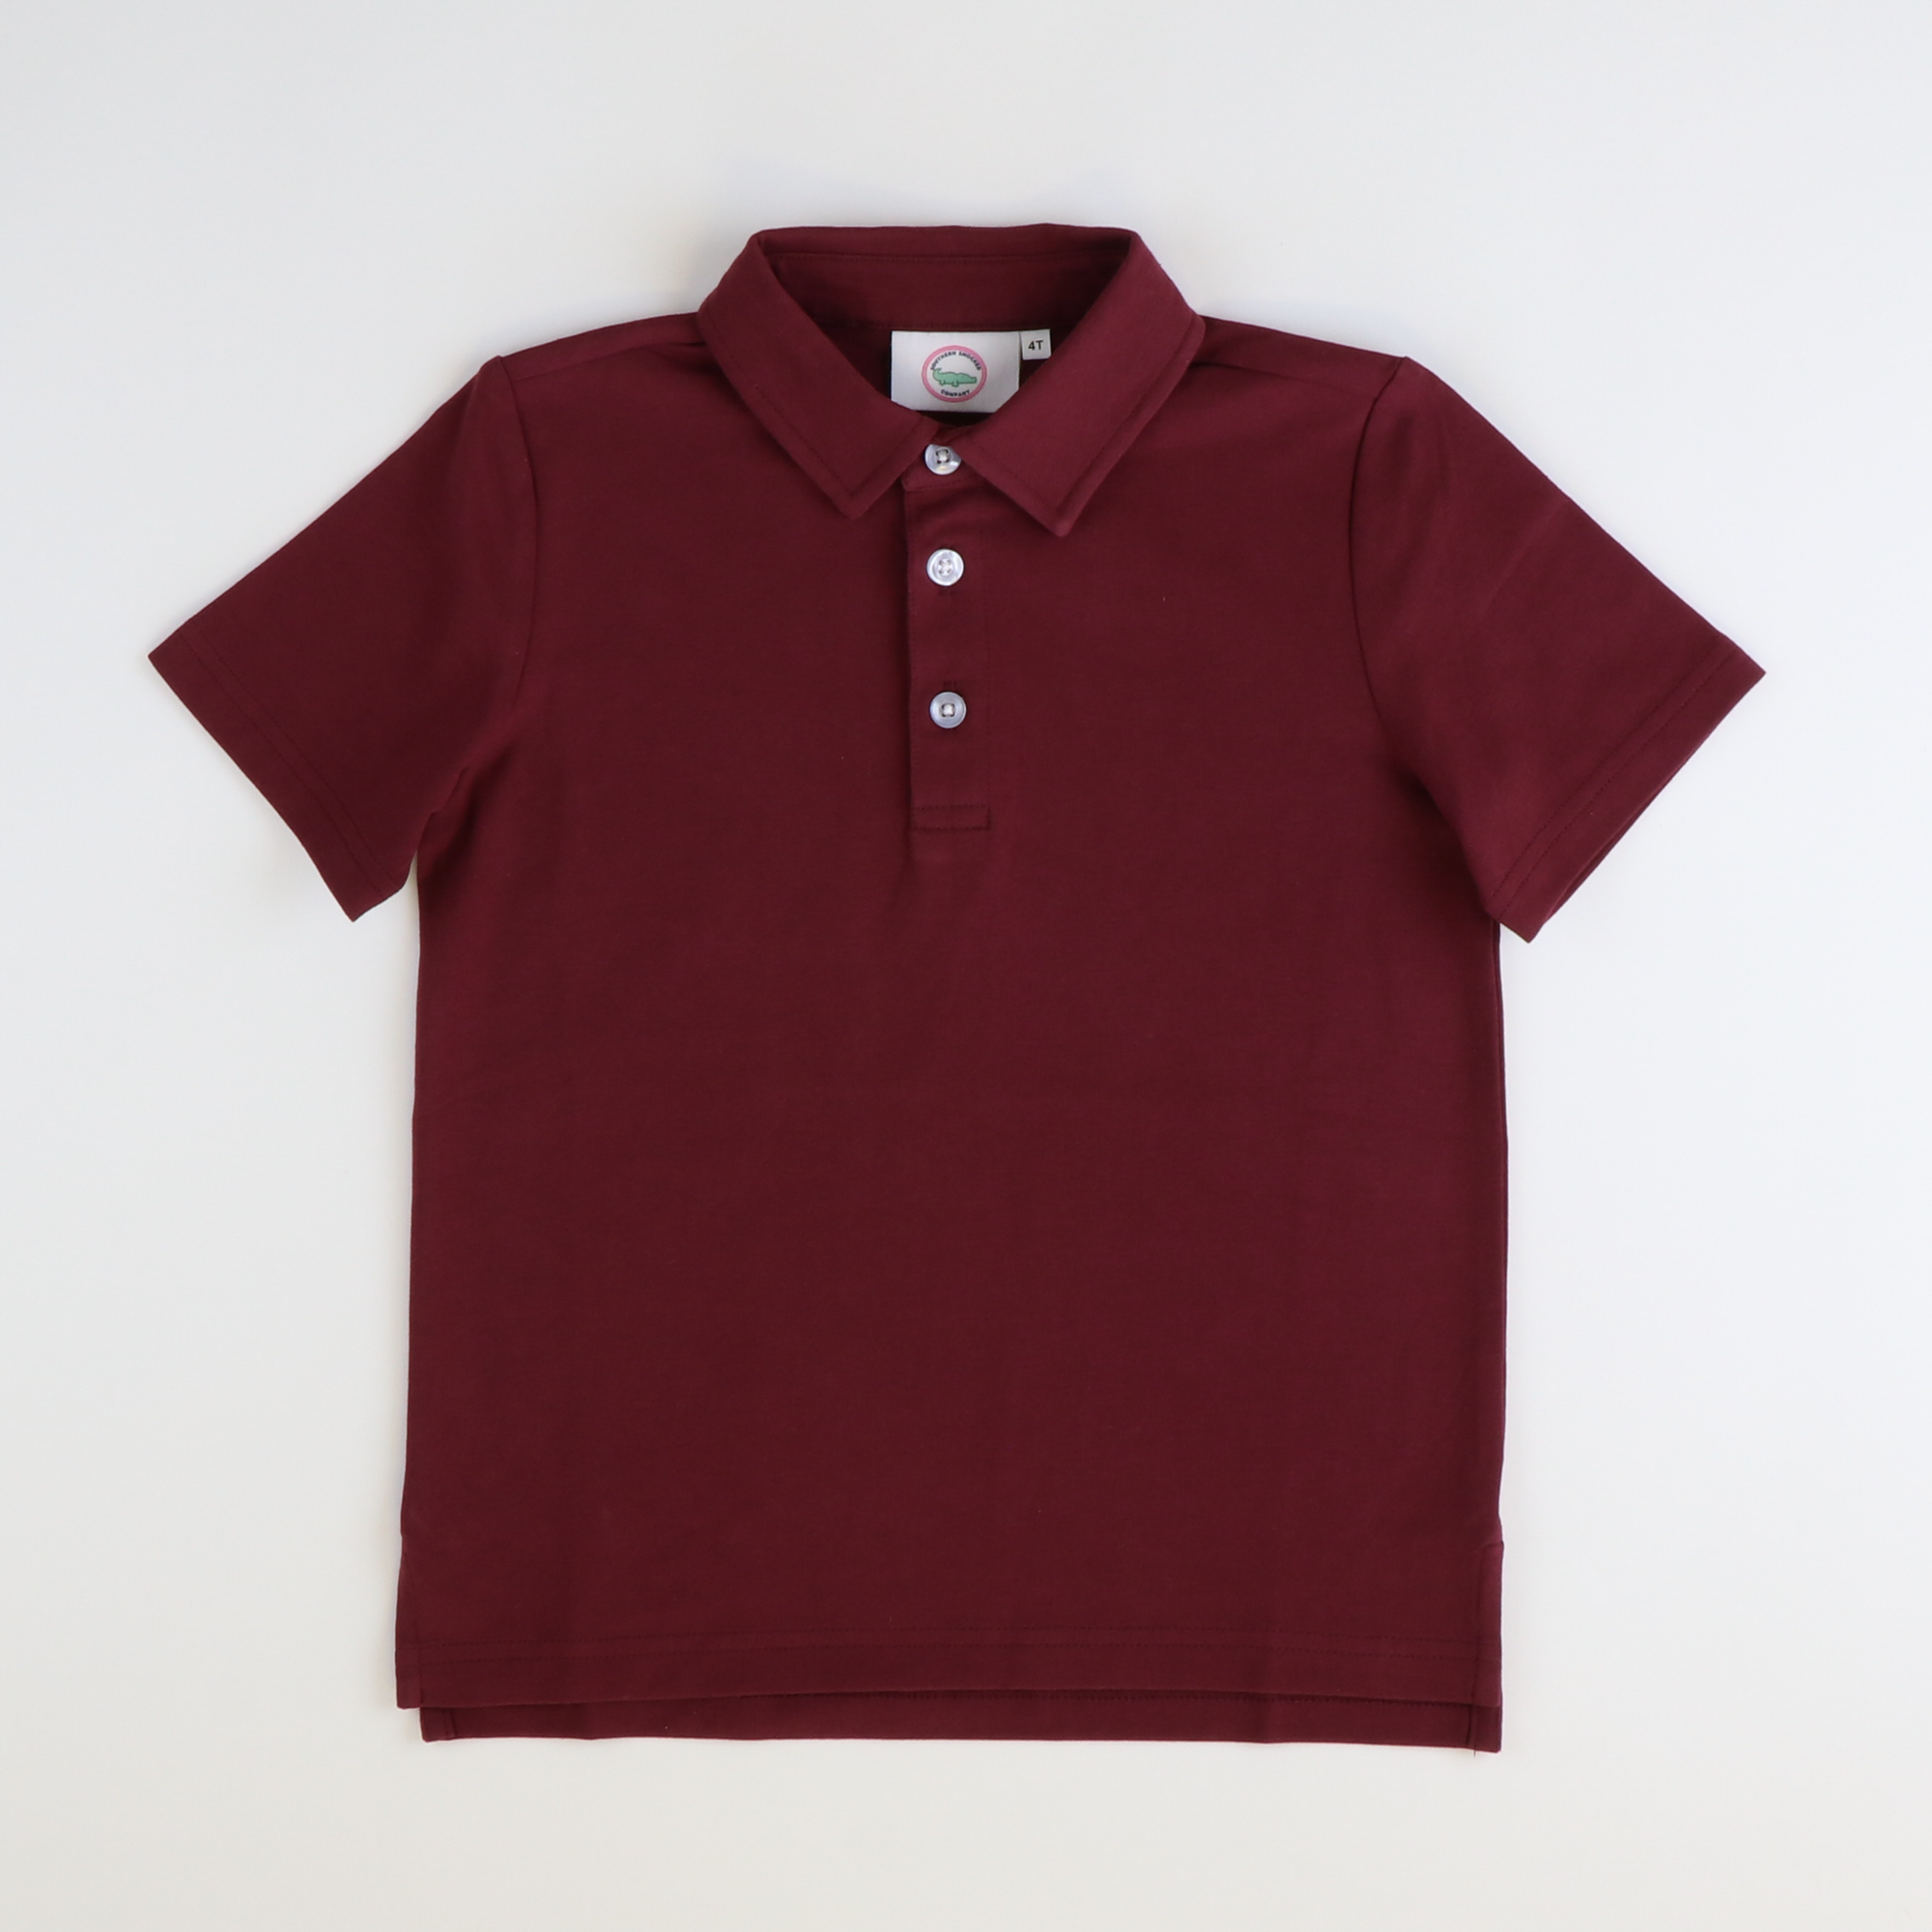 Boys Signature S/S Knit Polo - Maroon Solid